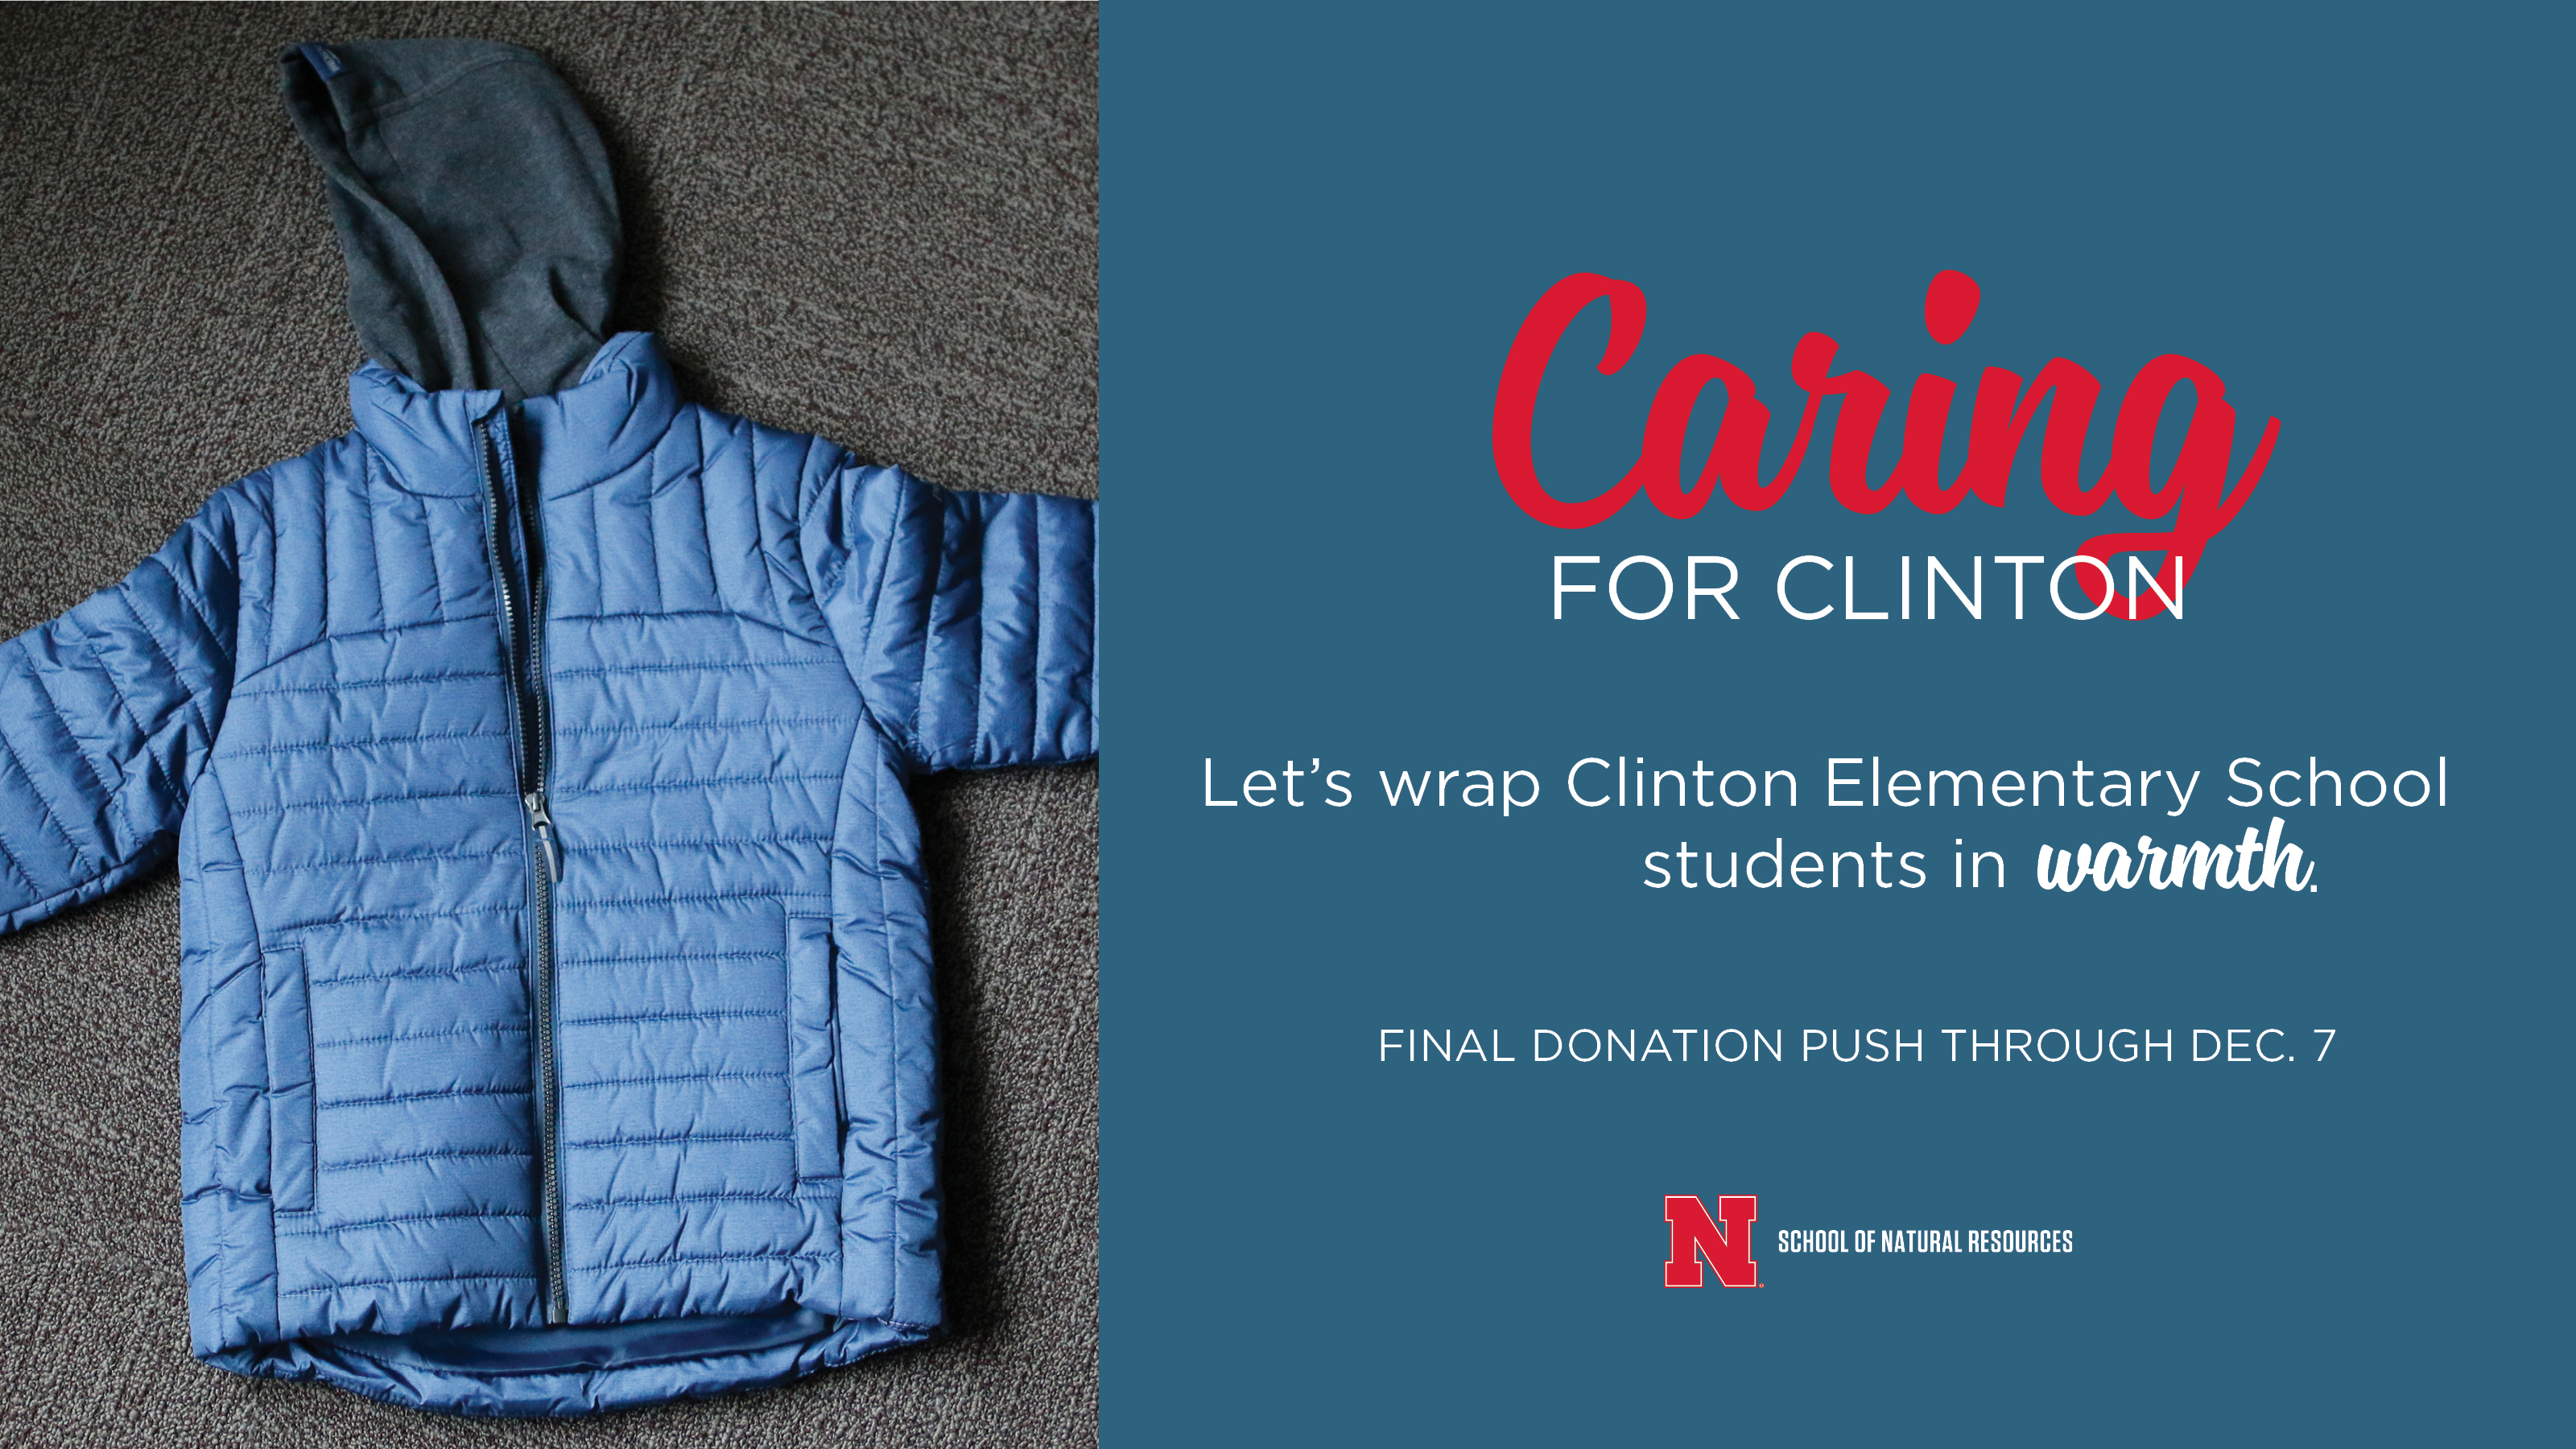 The final donation push for the Caring for Clinton campaign ends this week.